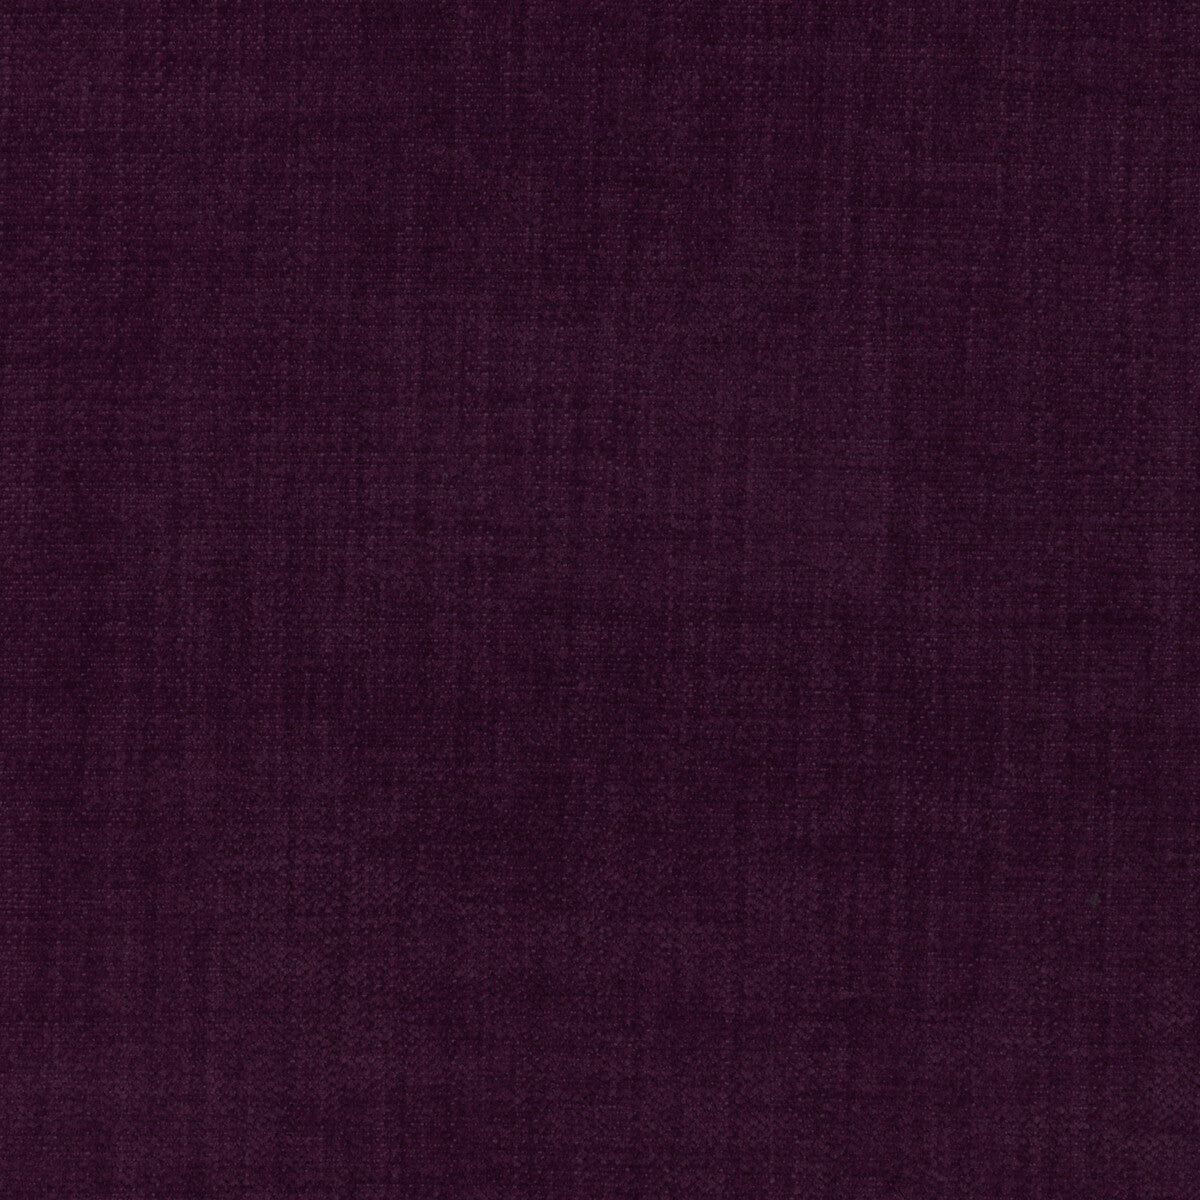 Accommodate fabric in mulberry color - pattern 36255.10.0 - by Kravet Contract in the Supreen collection